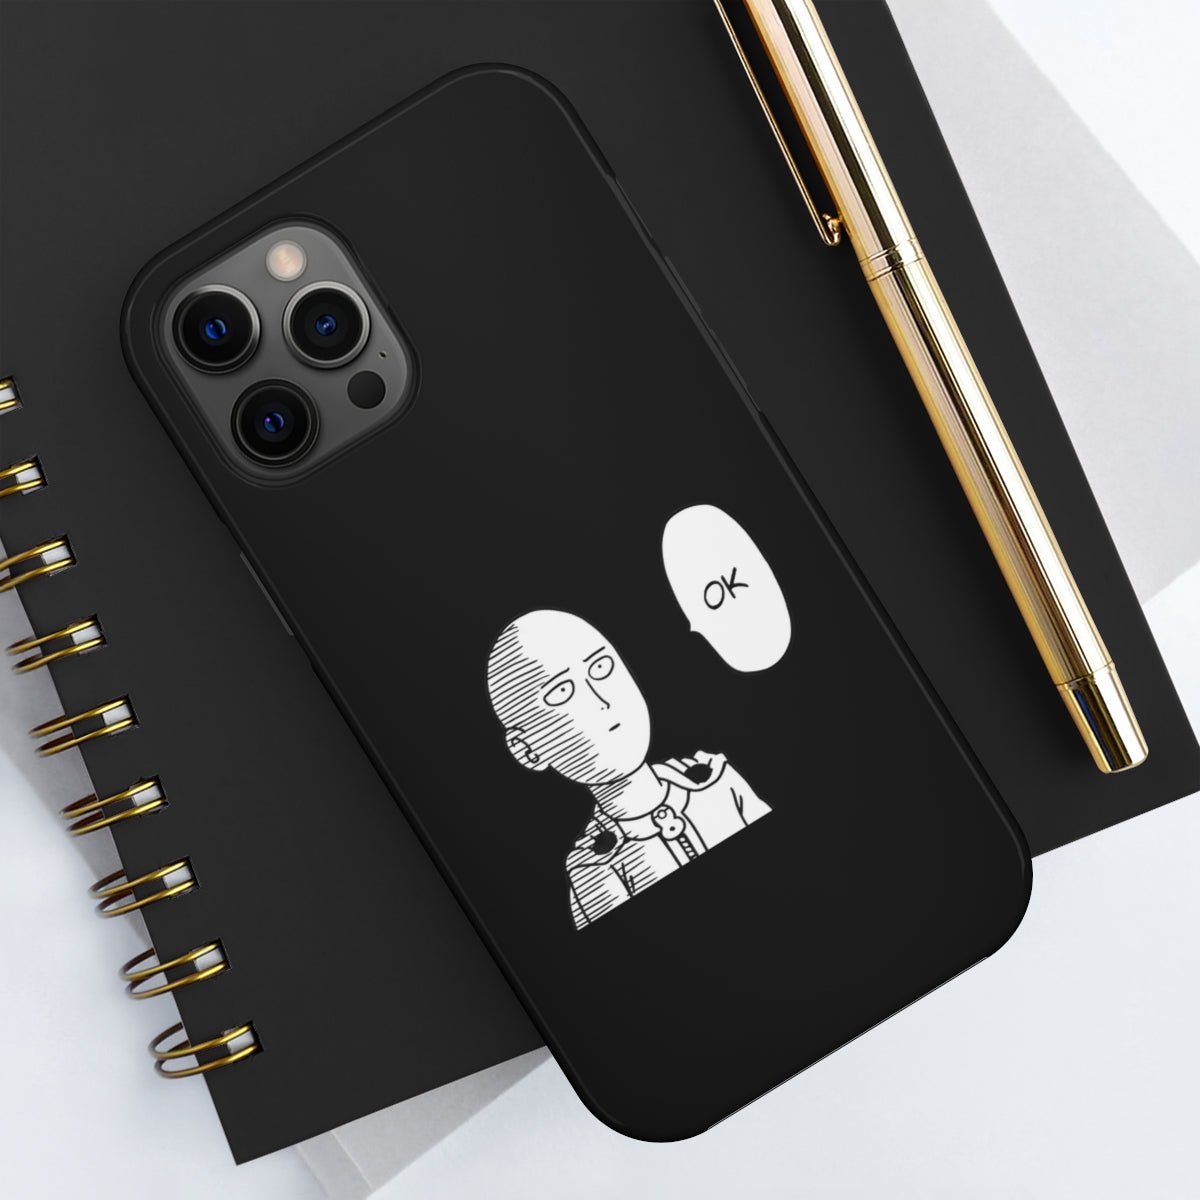 Saitama OK One Punch Man Anime iPhone Case (Series 12, 13, 14) - One Punch Fits